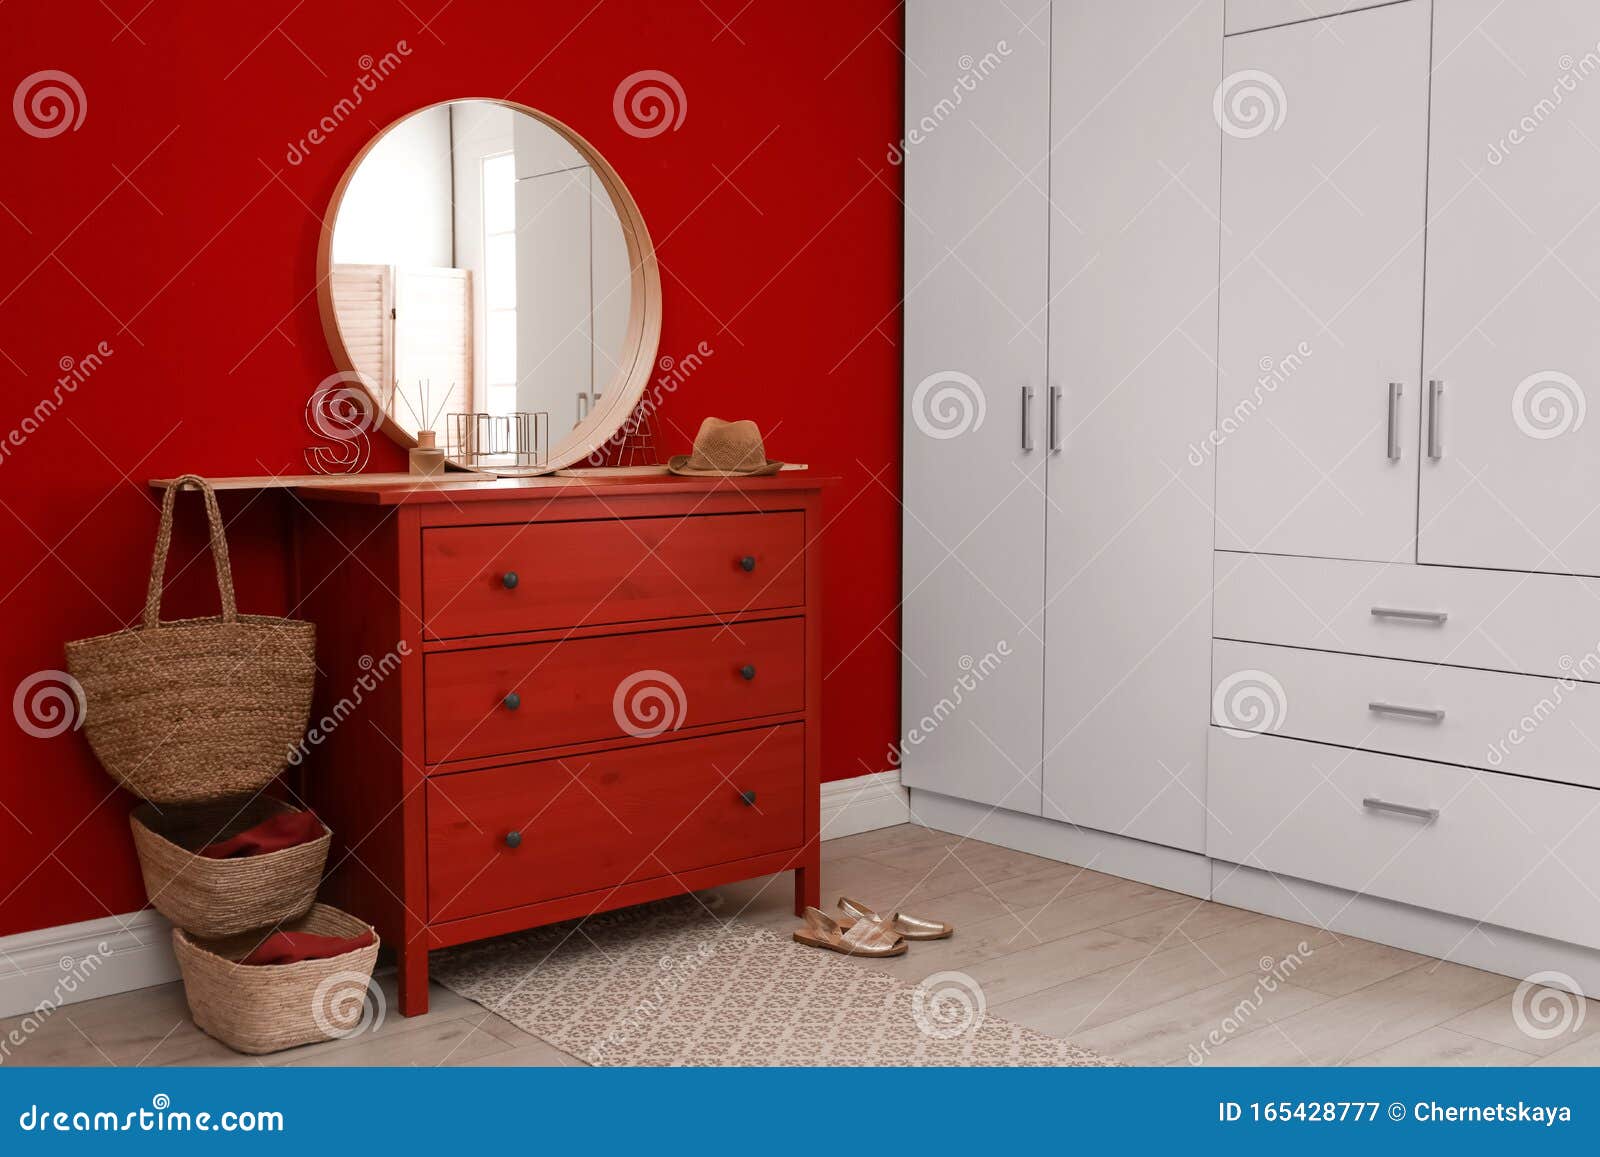 Round Mirror And Chest Of Drawers Near Red Wall In Room Stock